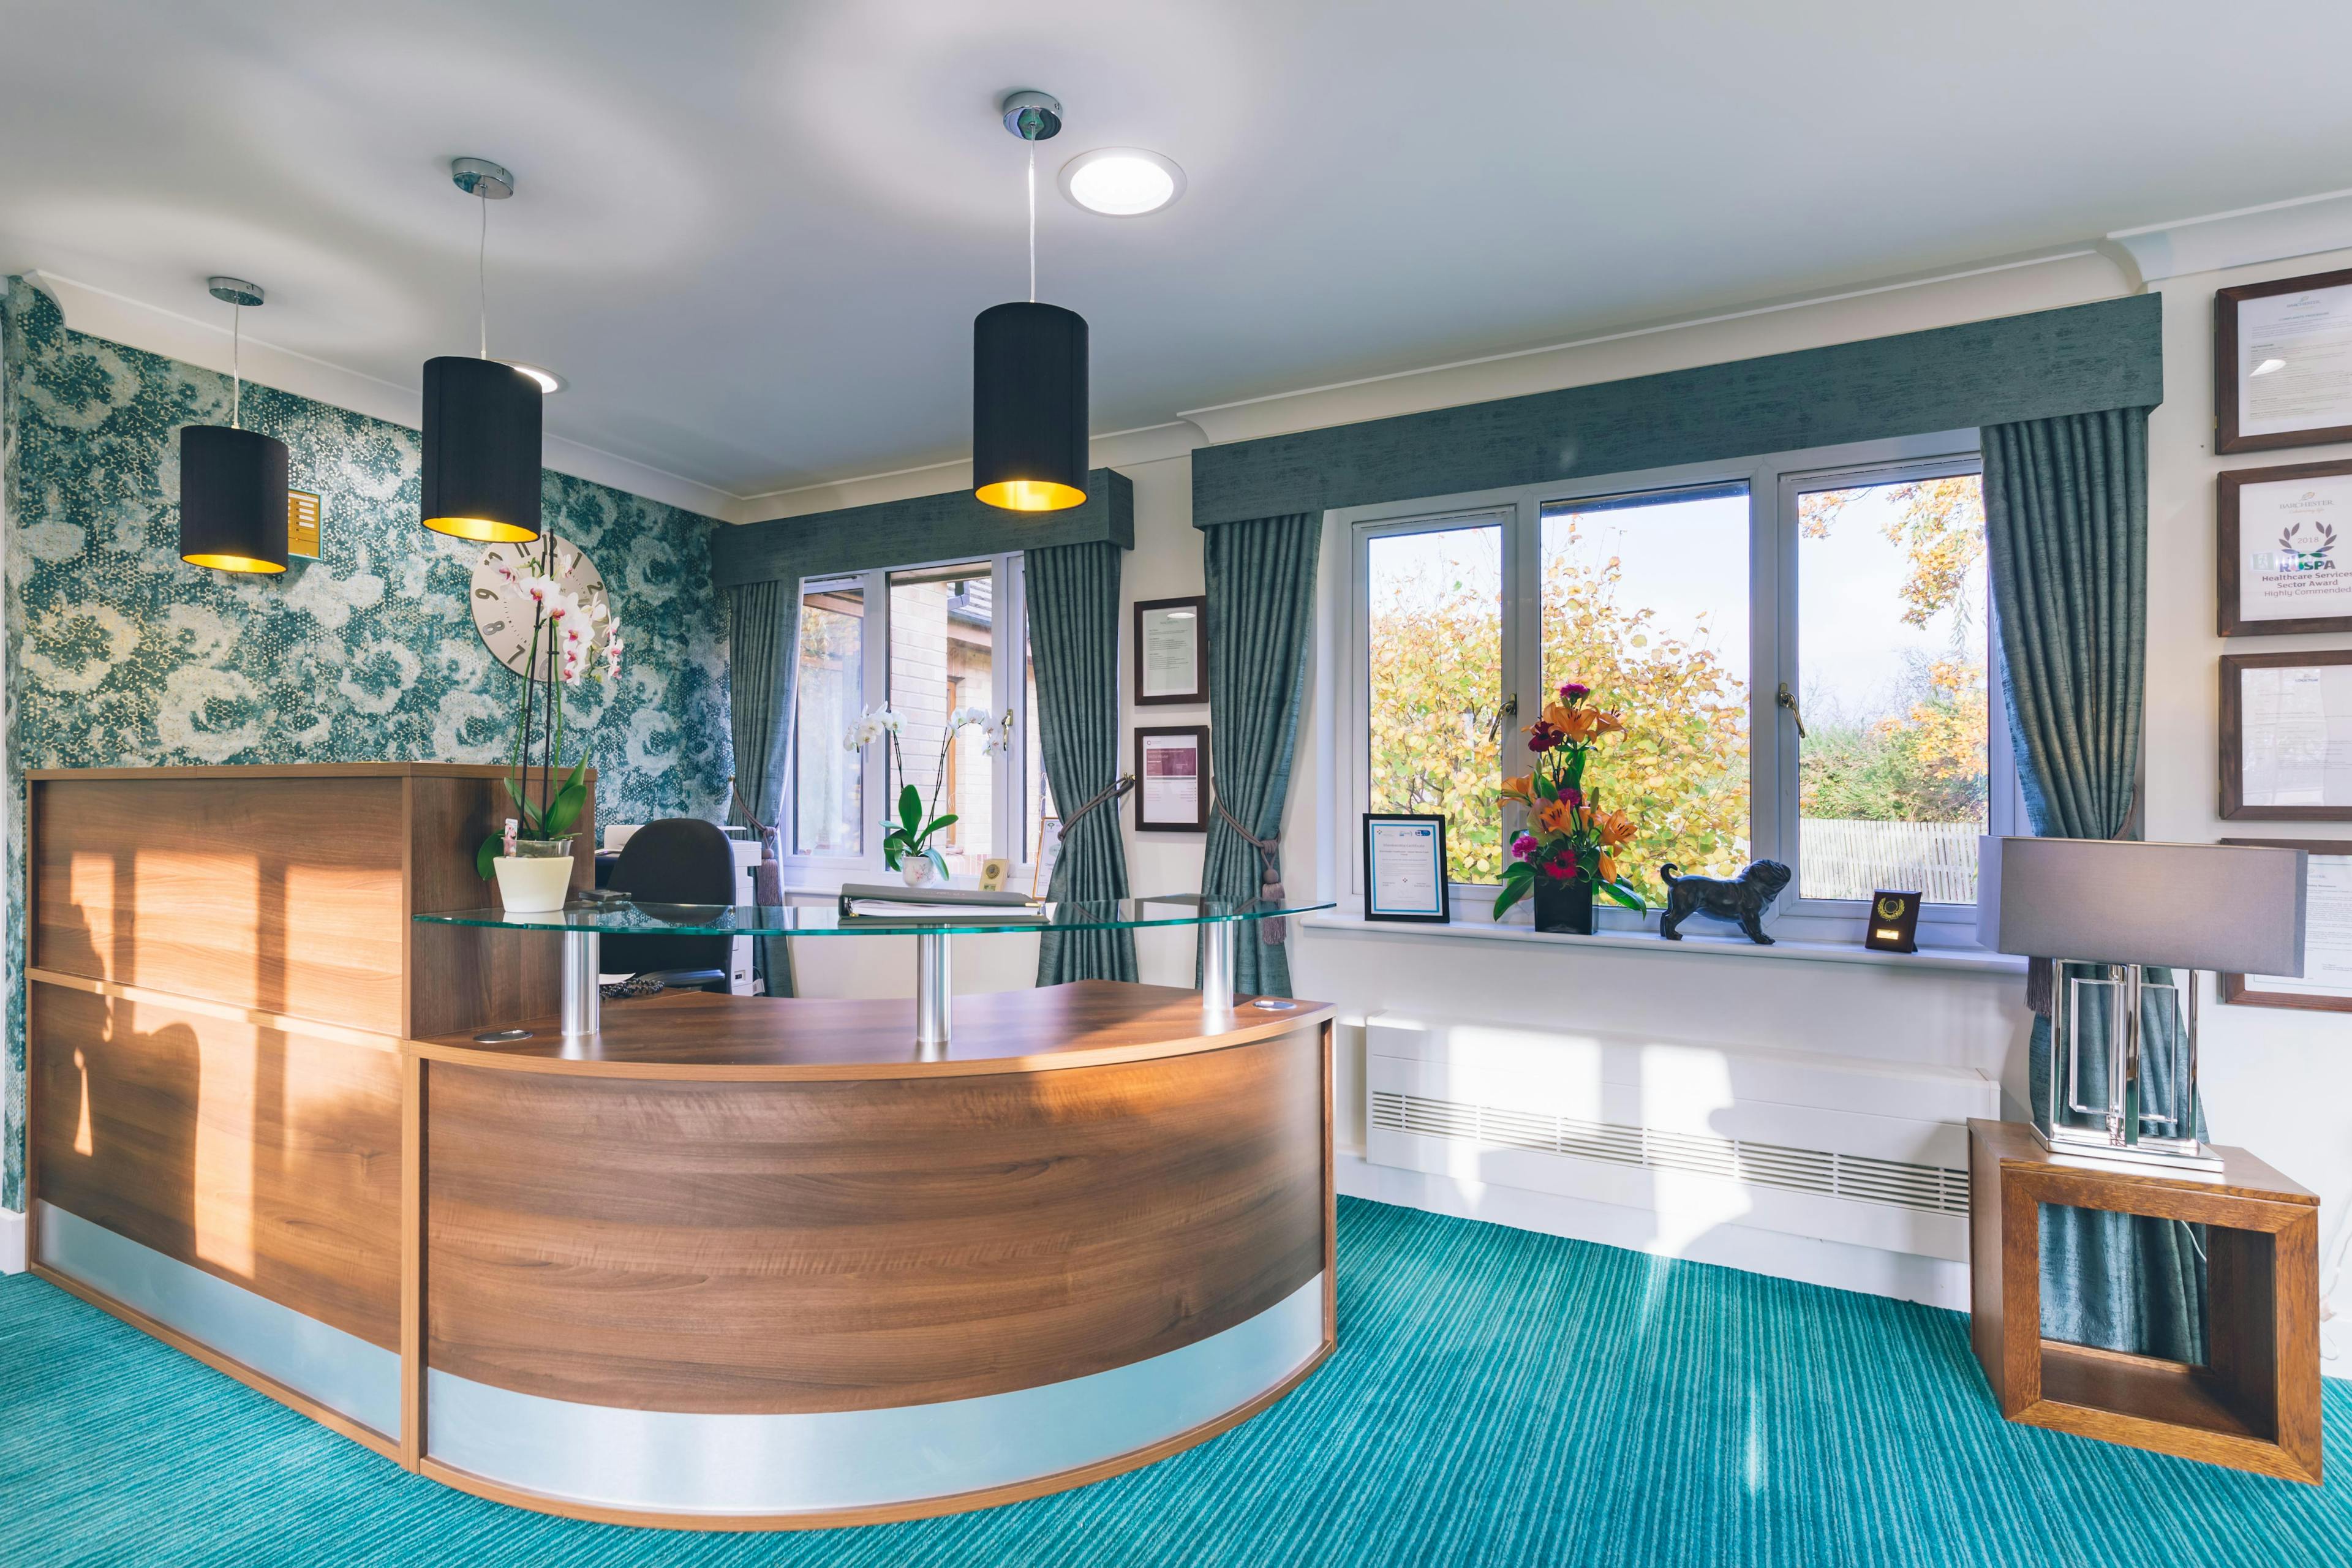 Reception of Vecta House Care Home in Newport, Isle of Wight